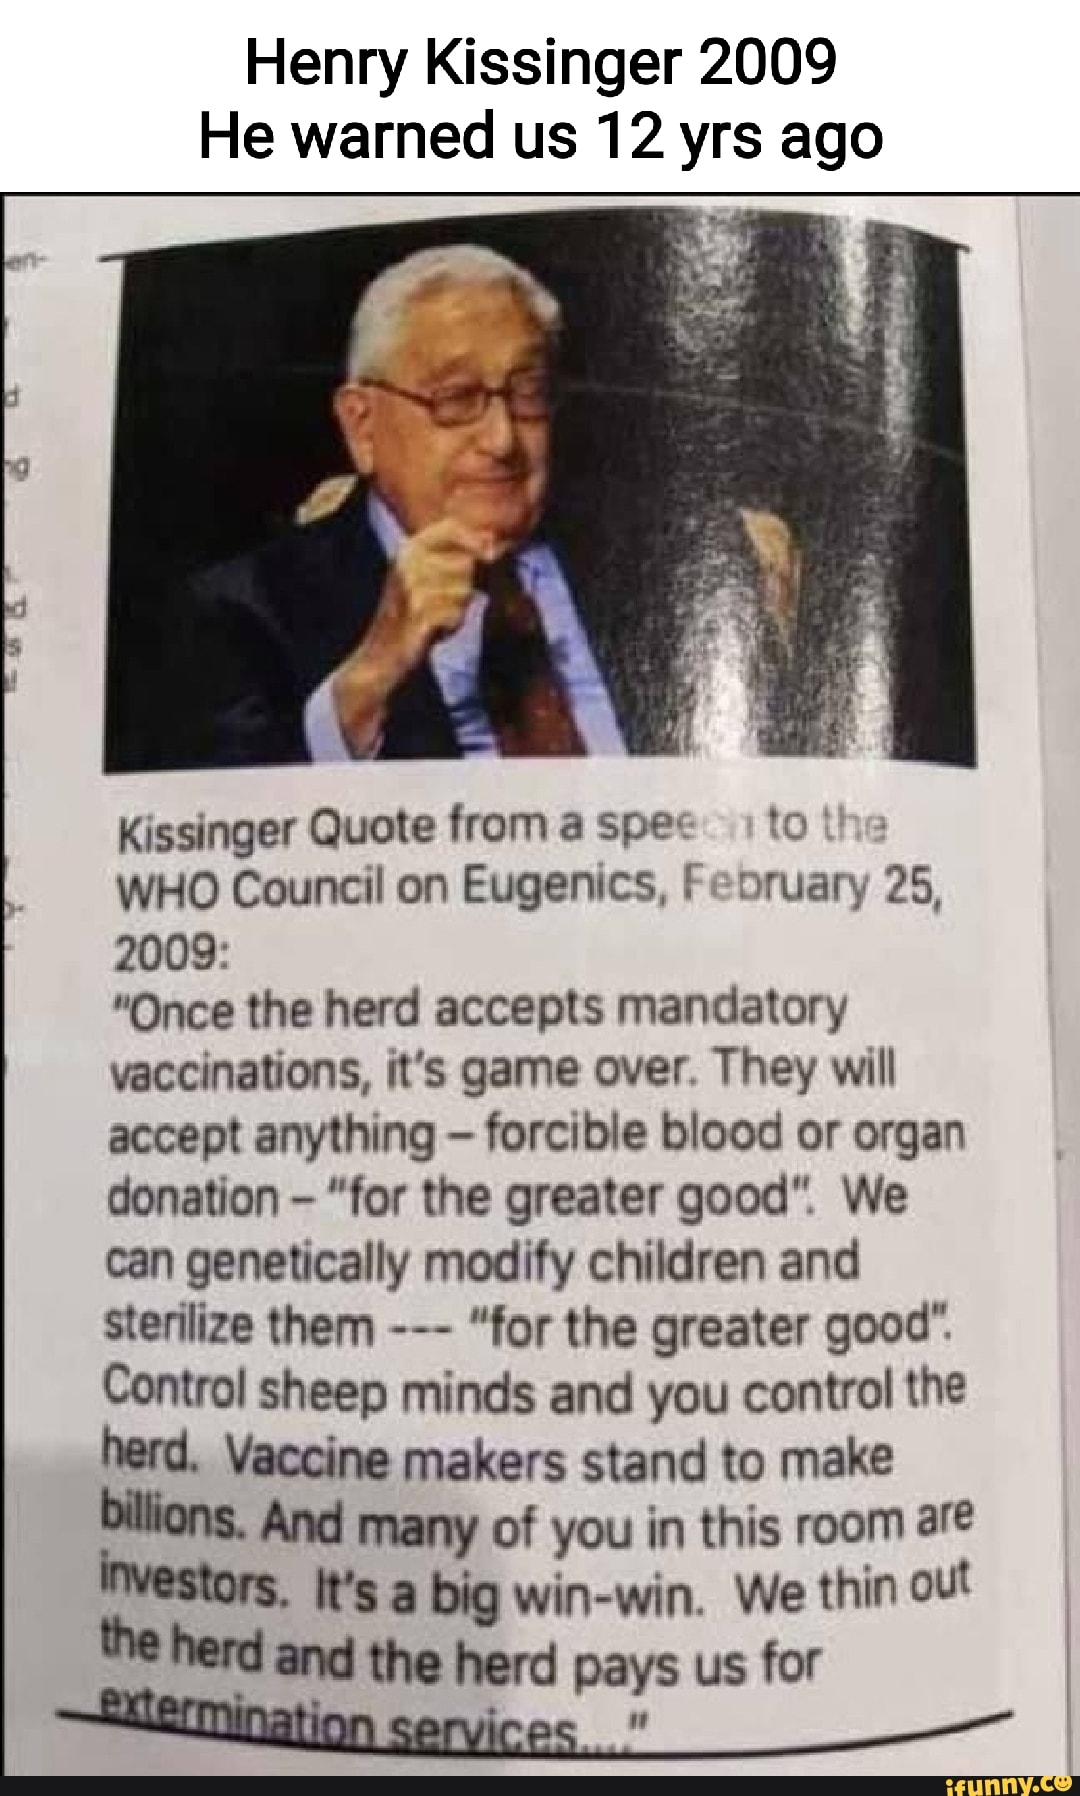 Henry Kissinger 2009 He warned us 12 yrs ago Kissinger Quote from a spex to I WHO Council on Eugenics, Feoruary 25, 2009: "Once the herd accepts mandatory vaccinations, it's game over. They will accept anything - forcible blood or organ donation - "for the greater good". We can genetically modify children and sterilize them "for the greater good". Control sheep minds and you control the herd. Vaccine makers stand to make billions. And many of you in this room are It's a big win-win. We thin out the herd and the herd pays us for